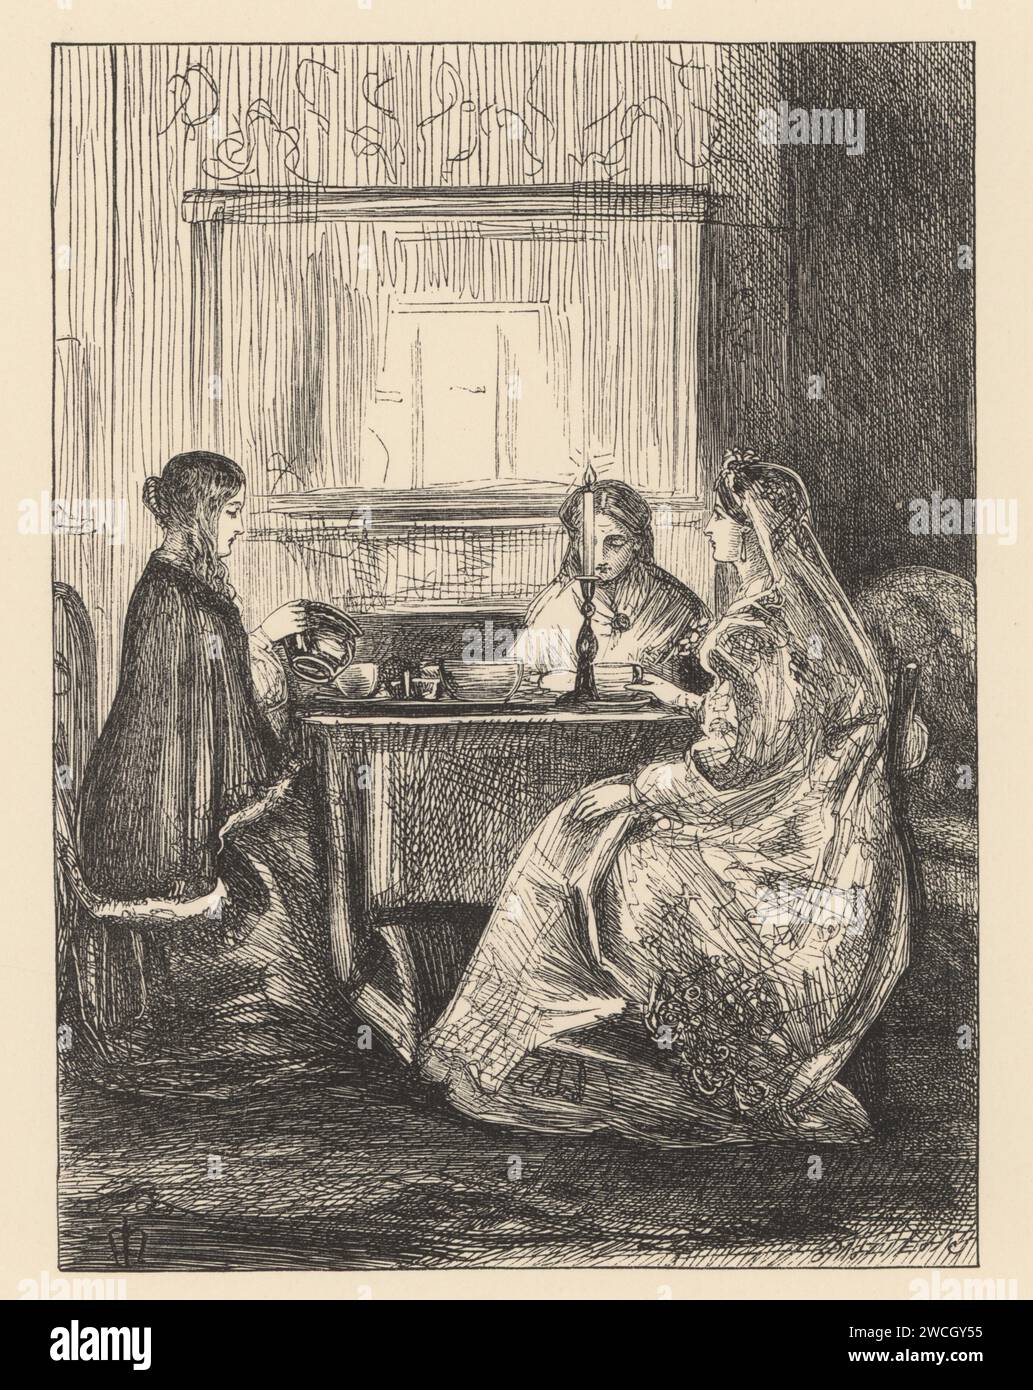 A Victorian bride in bridal gown drinking tea at the breakfast table with her family. The Wedding Morning from Good Words magazine. Woodcut by the Dalziel brothers after an illustration by Pre-Raphaelite artist John Everett Millais from Millais’ Illustrations, a Collection of Drawings on Wood, Alexander Strahan, London, 1866. Stock Photo